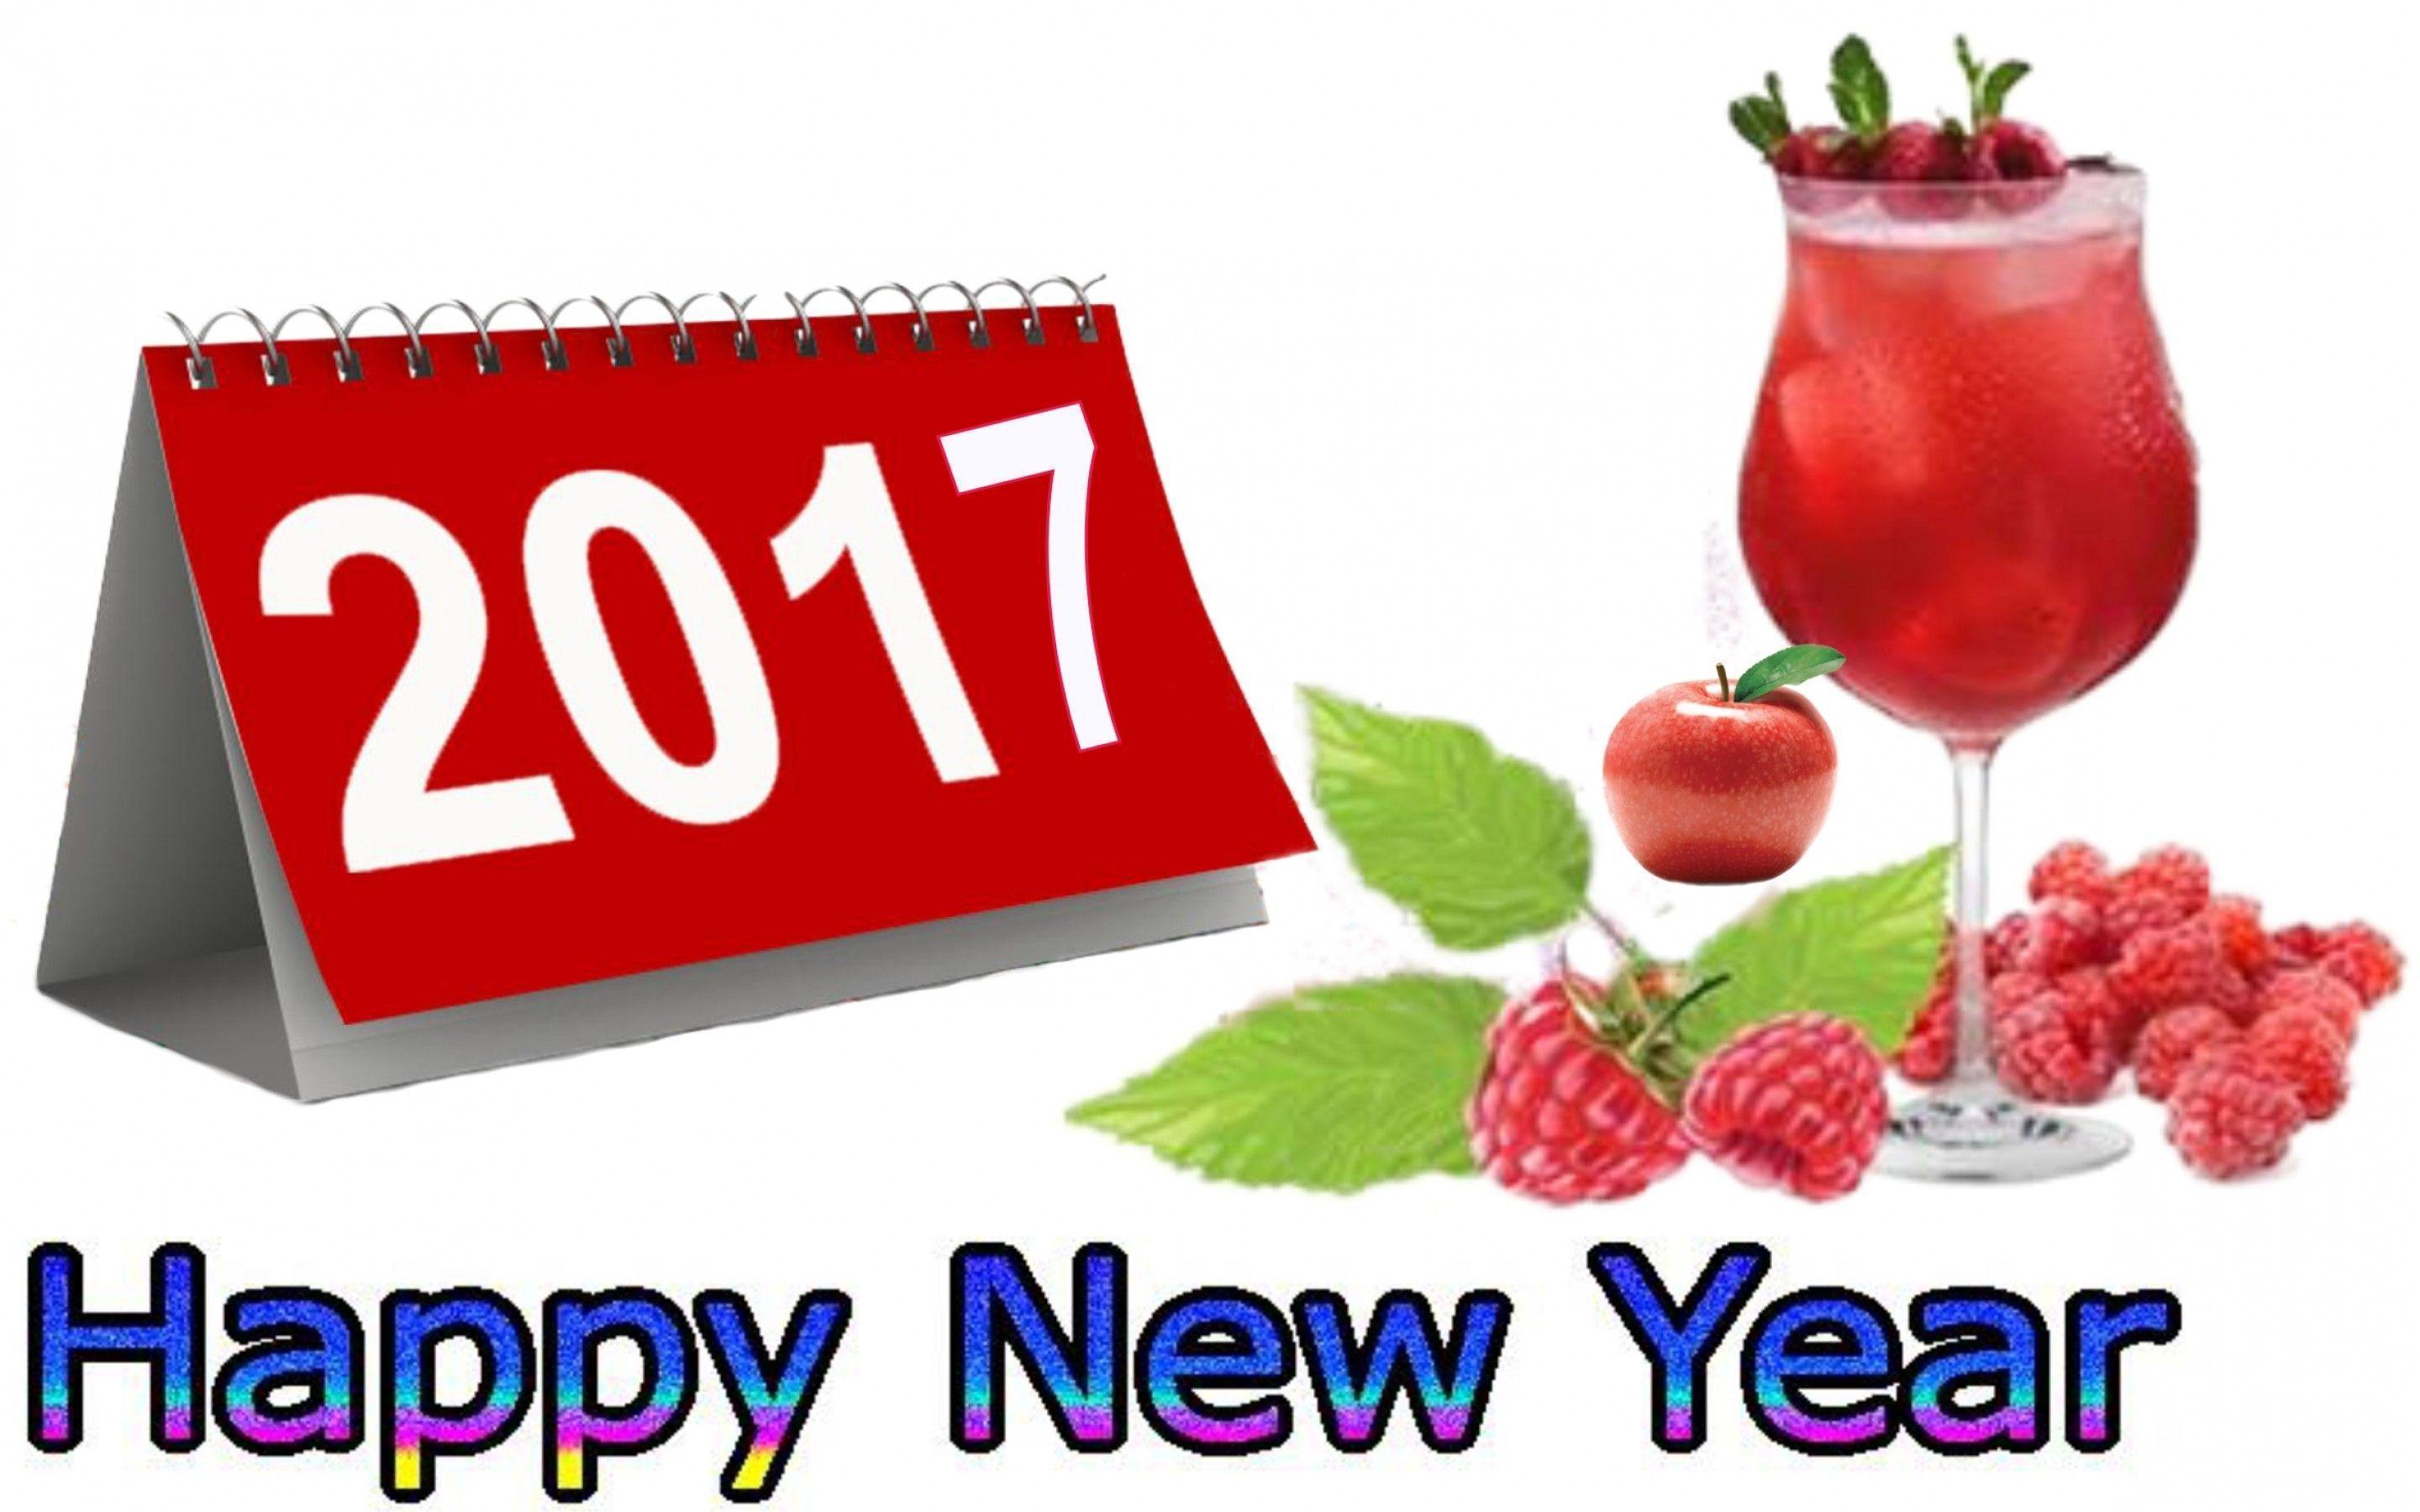 Happy New Year 2017 Wallpaper Archives